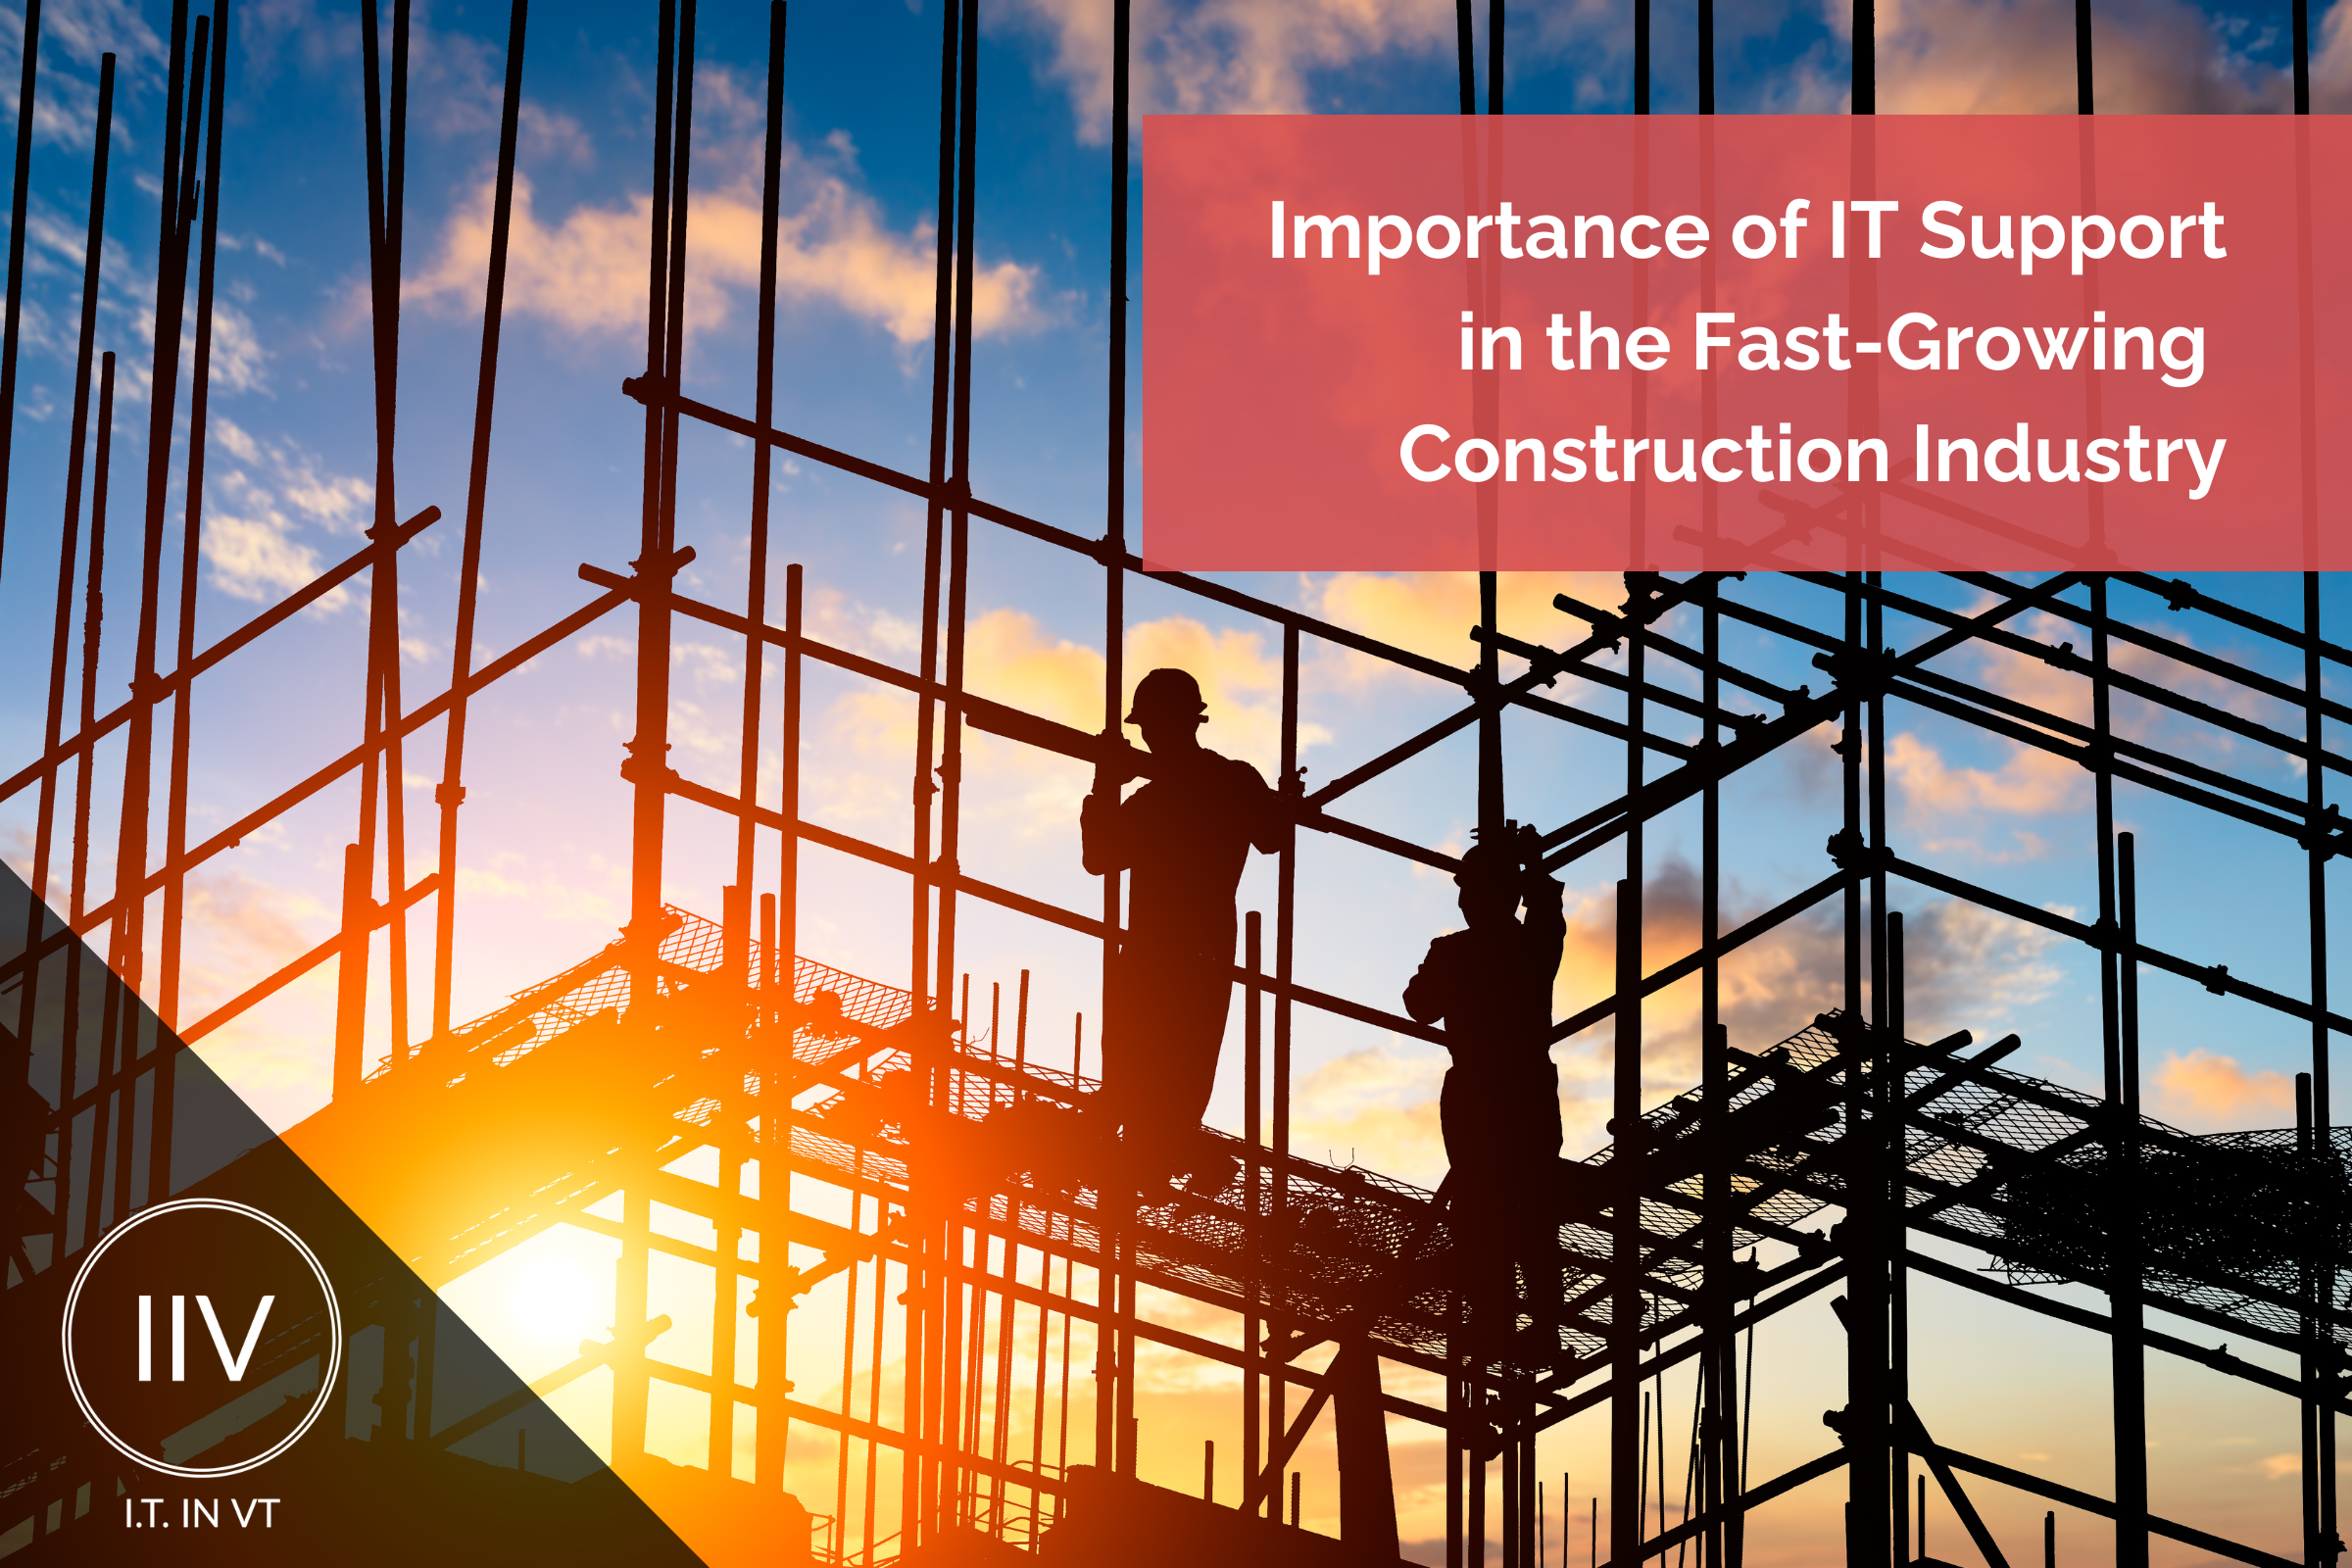 men working in a construction of a building: text: Importance of IT Support in the Cfast growing construction industry